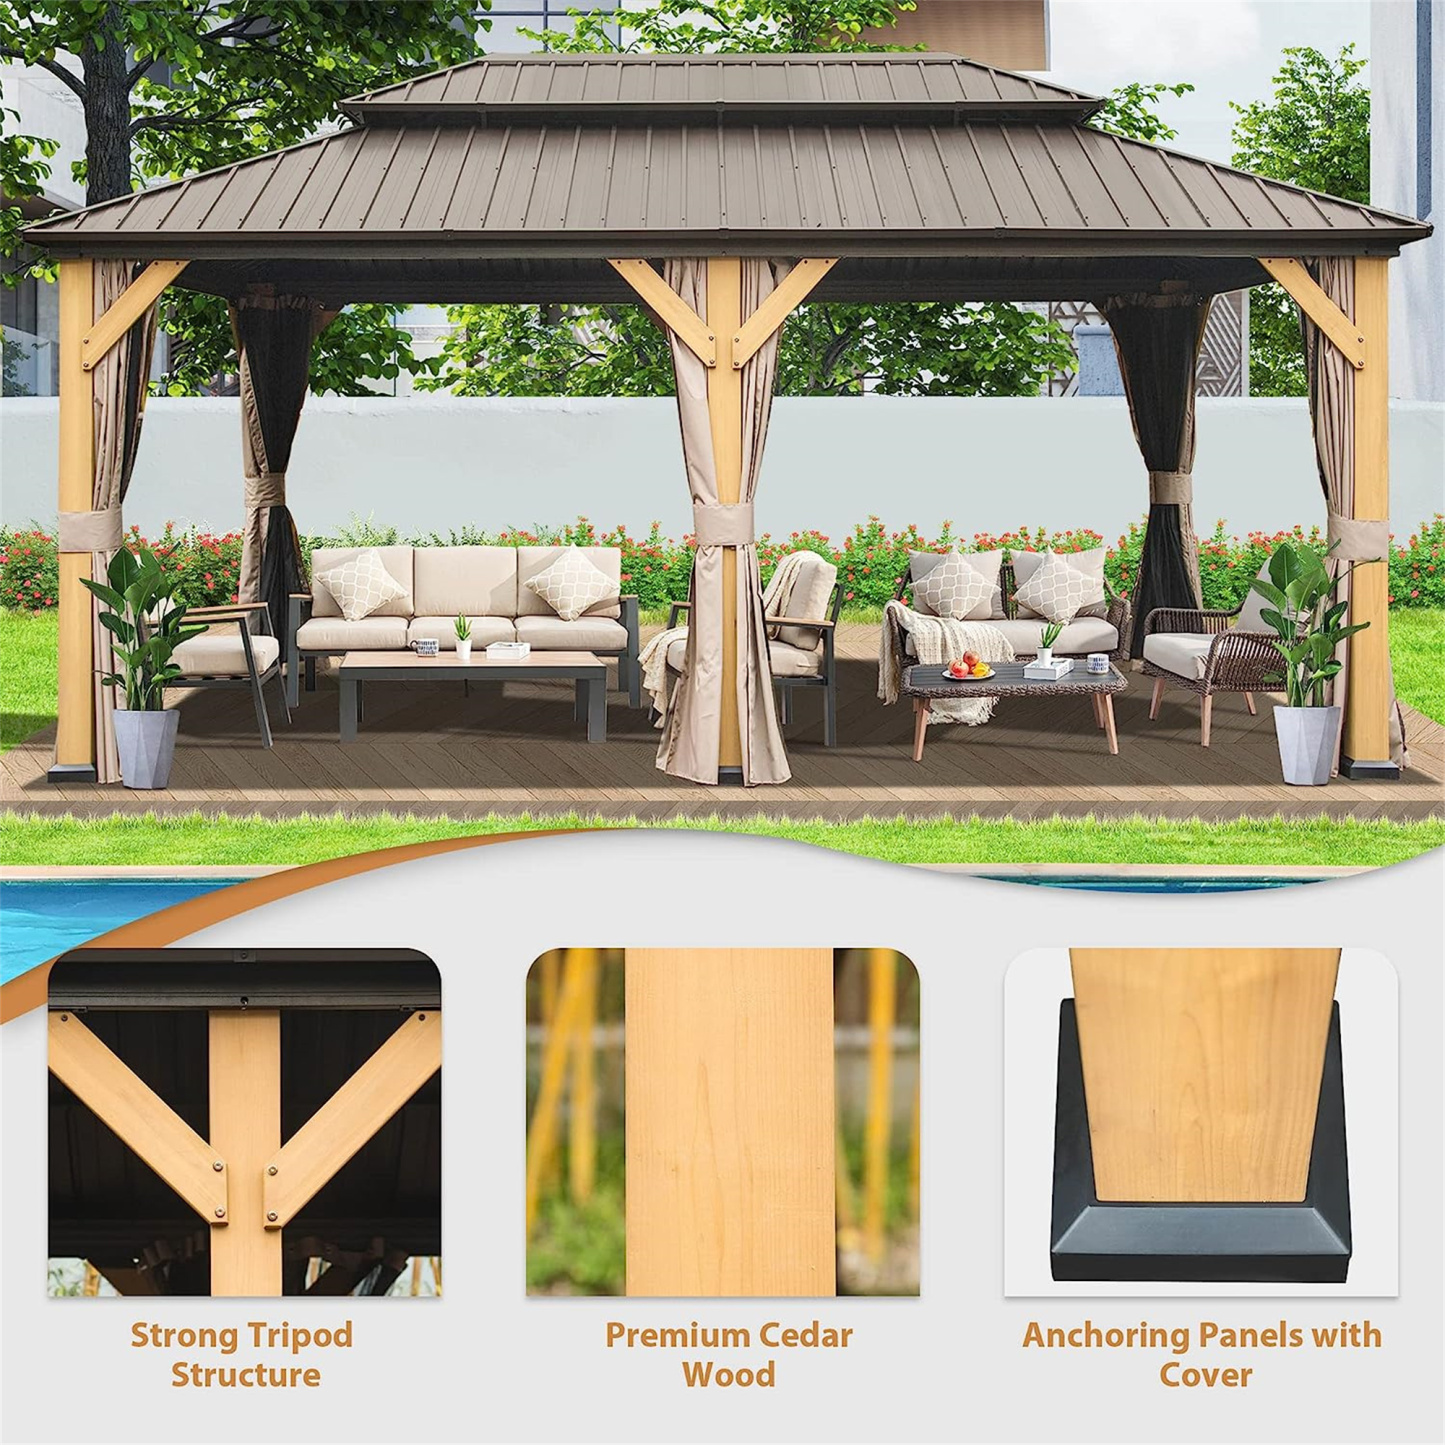 12x20 ft Outdoor Cedar Wood Frame Permanent Metal Pavilion Hardtop Gazebo with Galvanized Steel Double Roof, Curtains and Netting Included-Mondawe